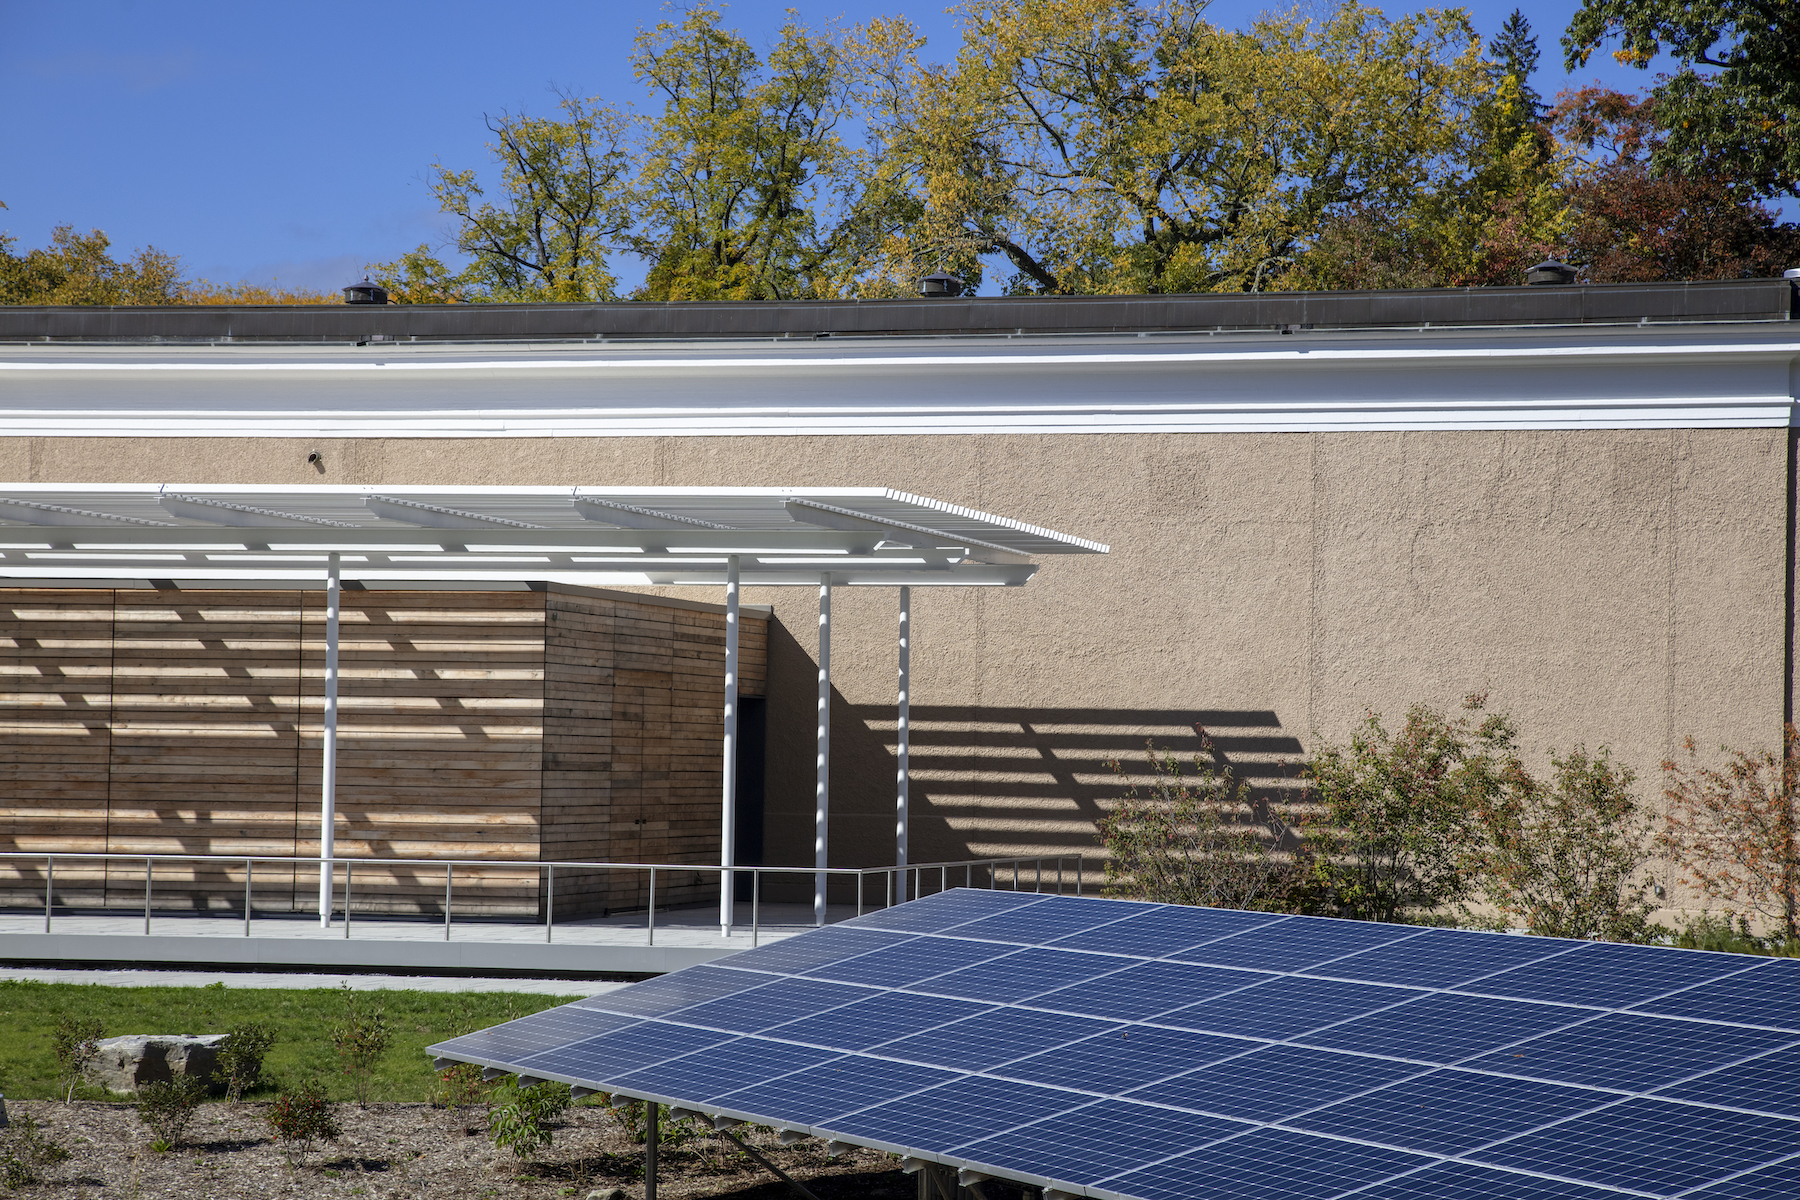 Solar arrays contribute to the building's energy efficiency.